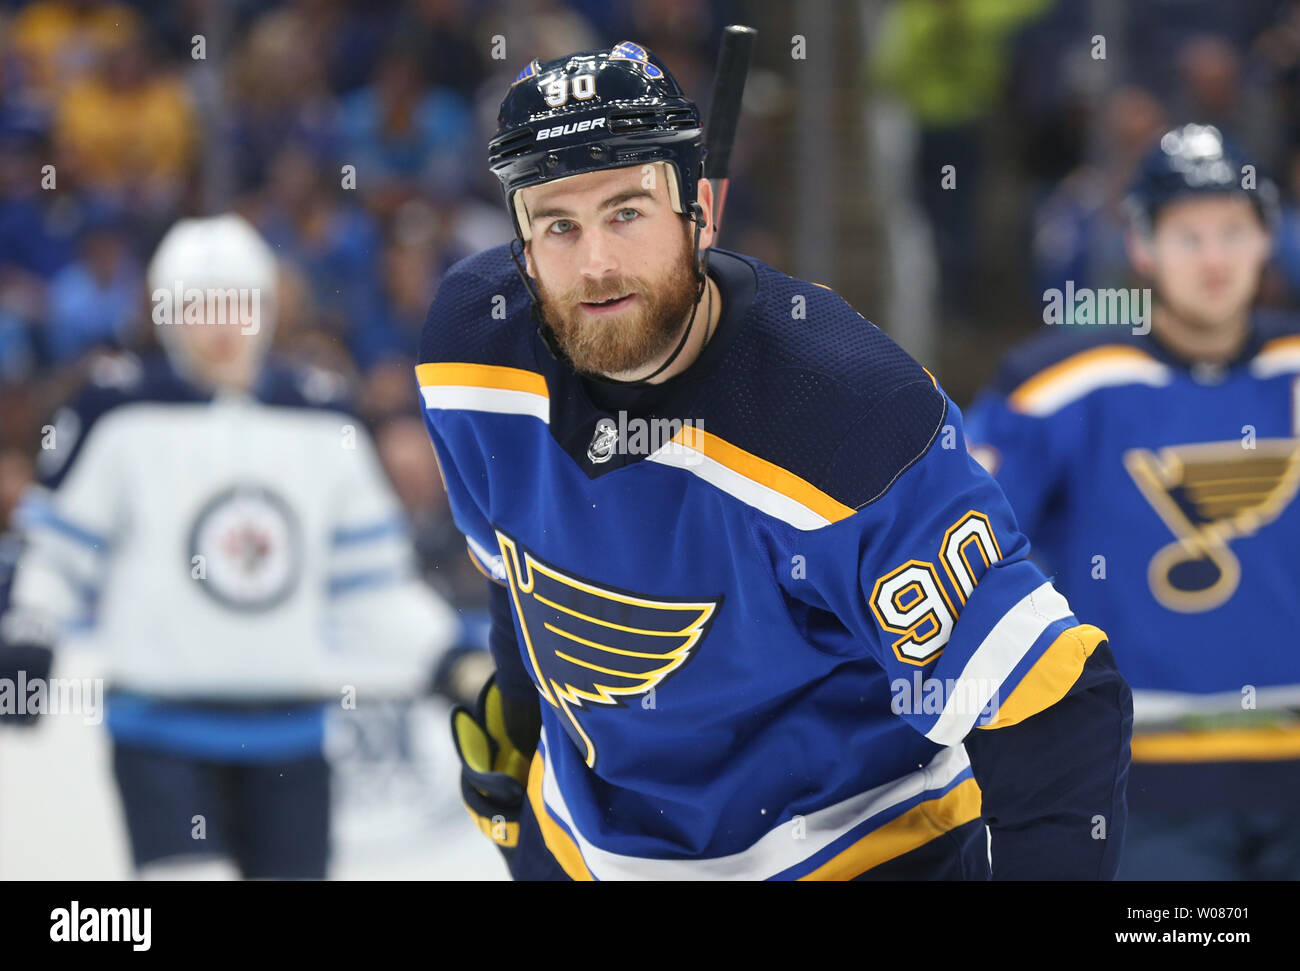 St. Louis Blues: Is Ryan O'Reilly Worthy Of The C?